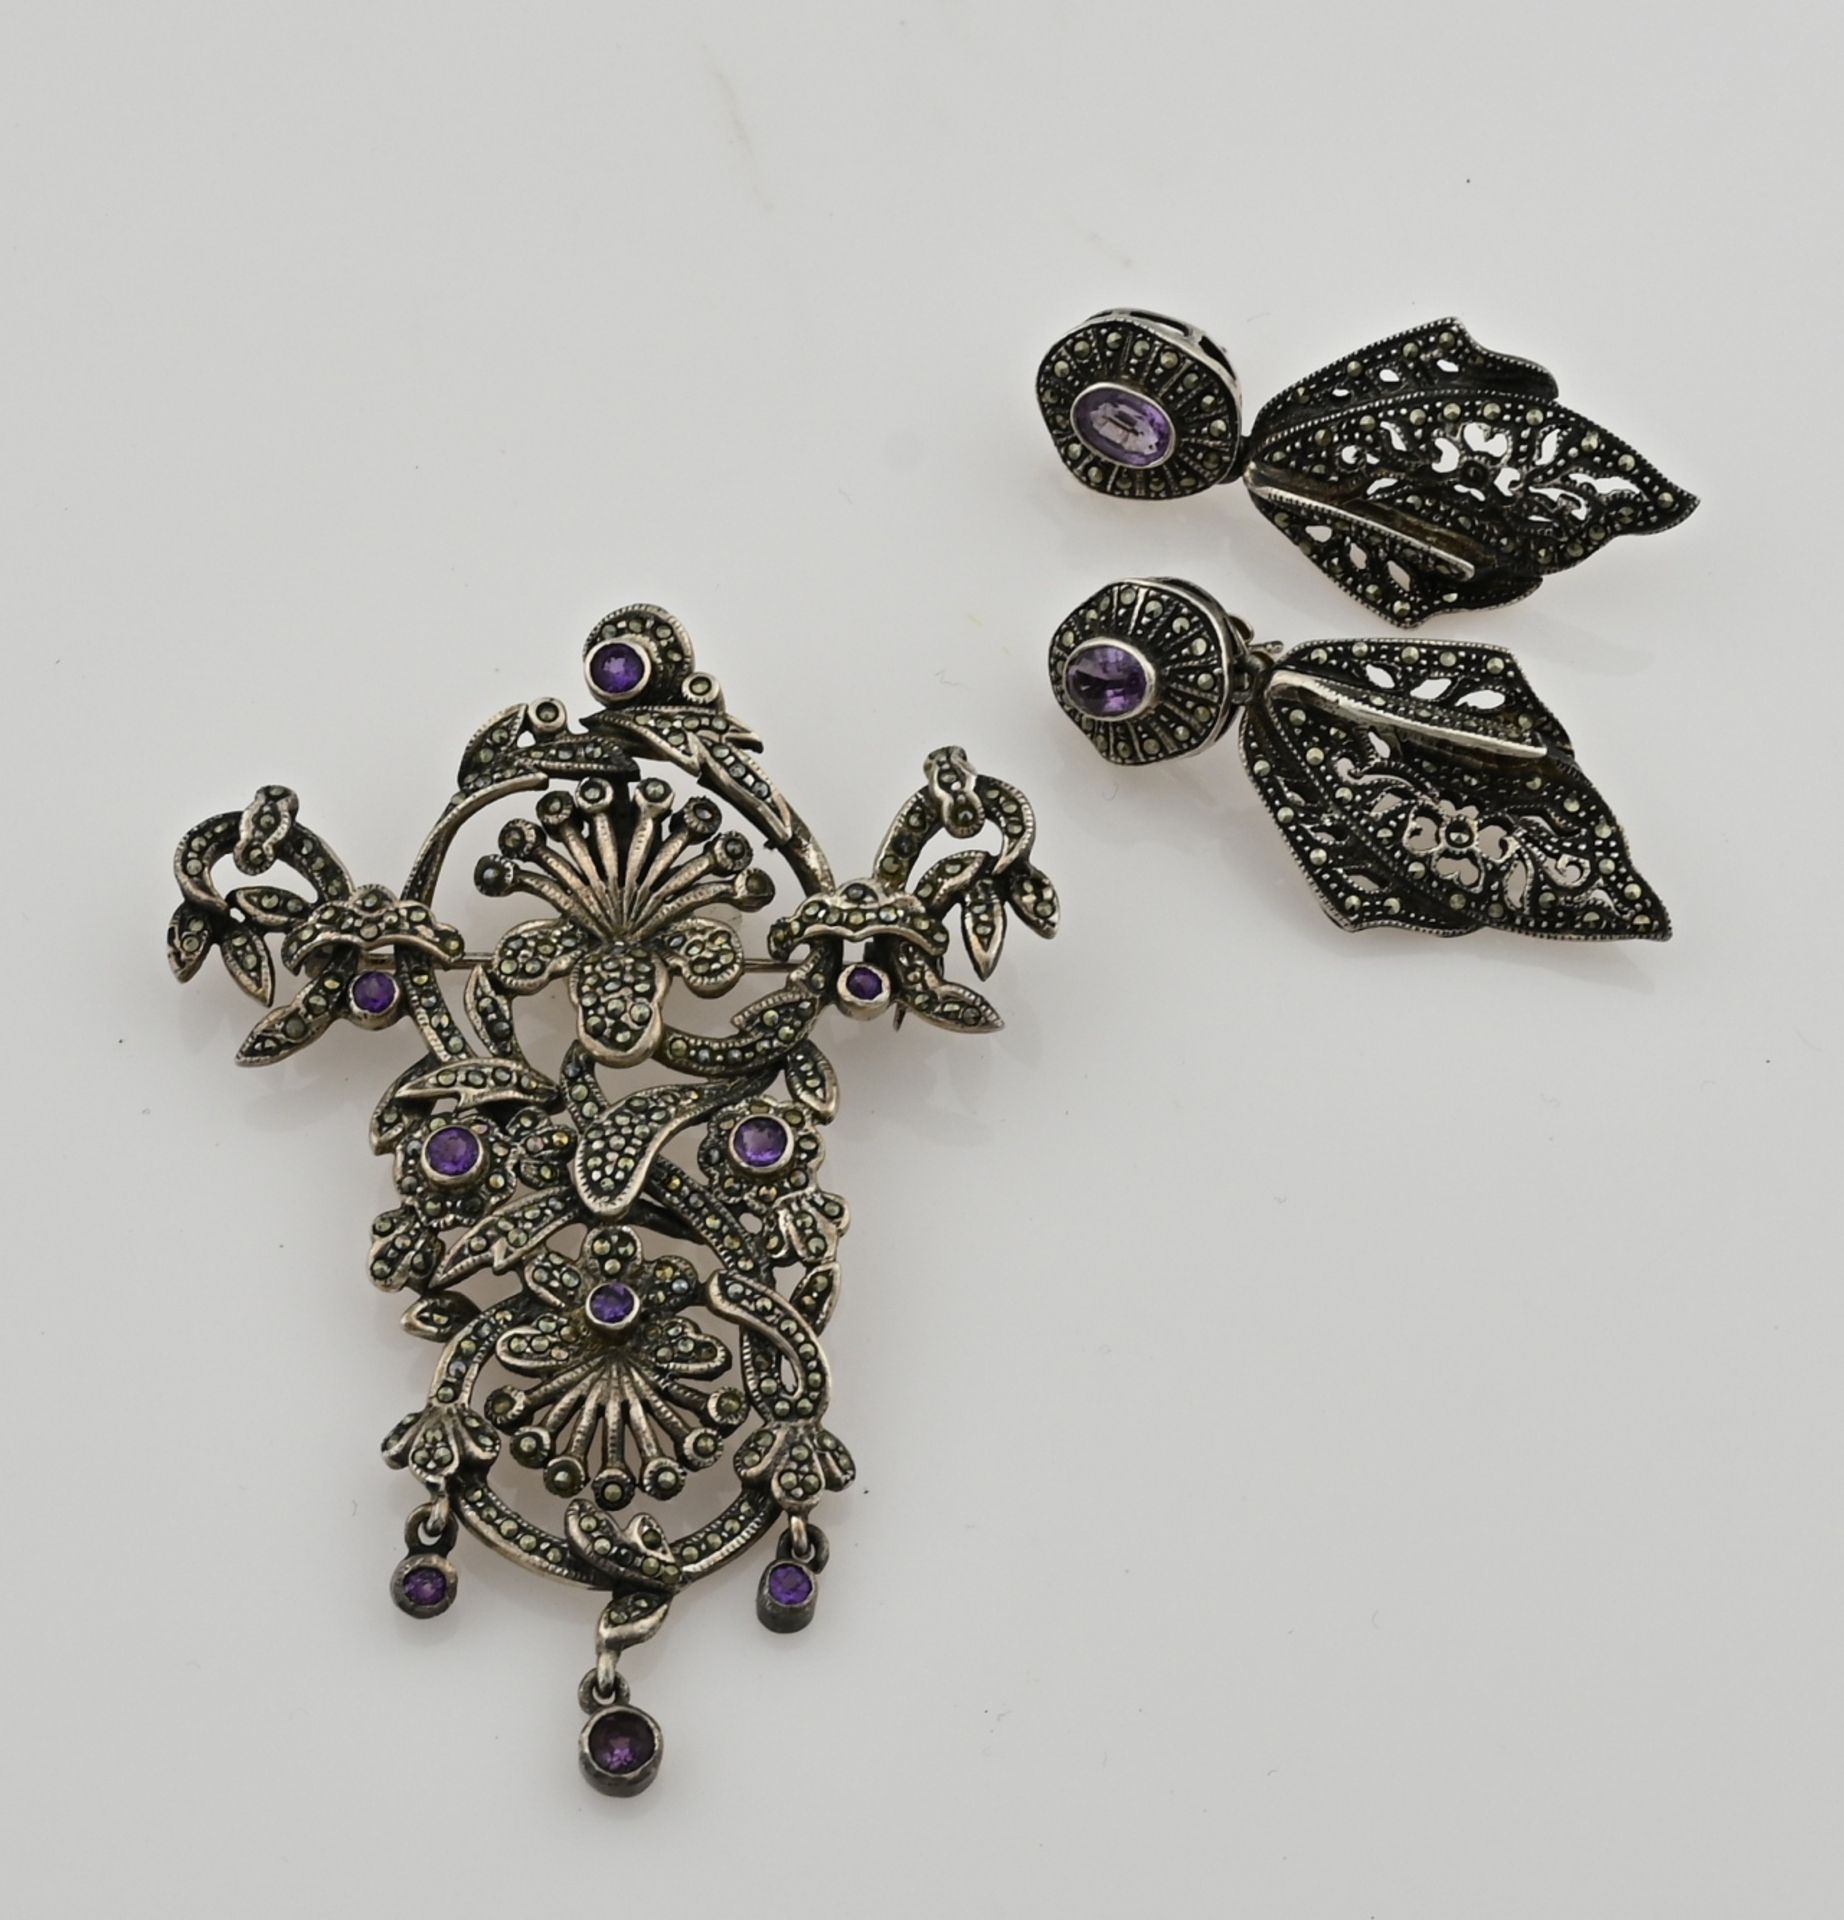 Silver pendant/brooch and earrings with marquesite